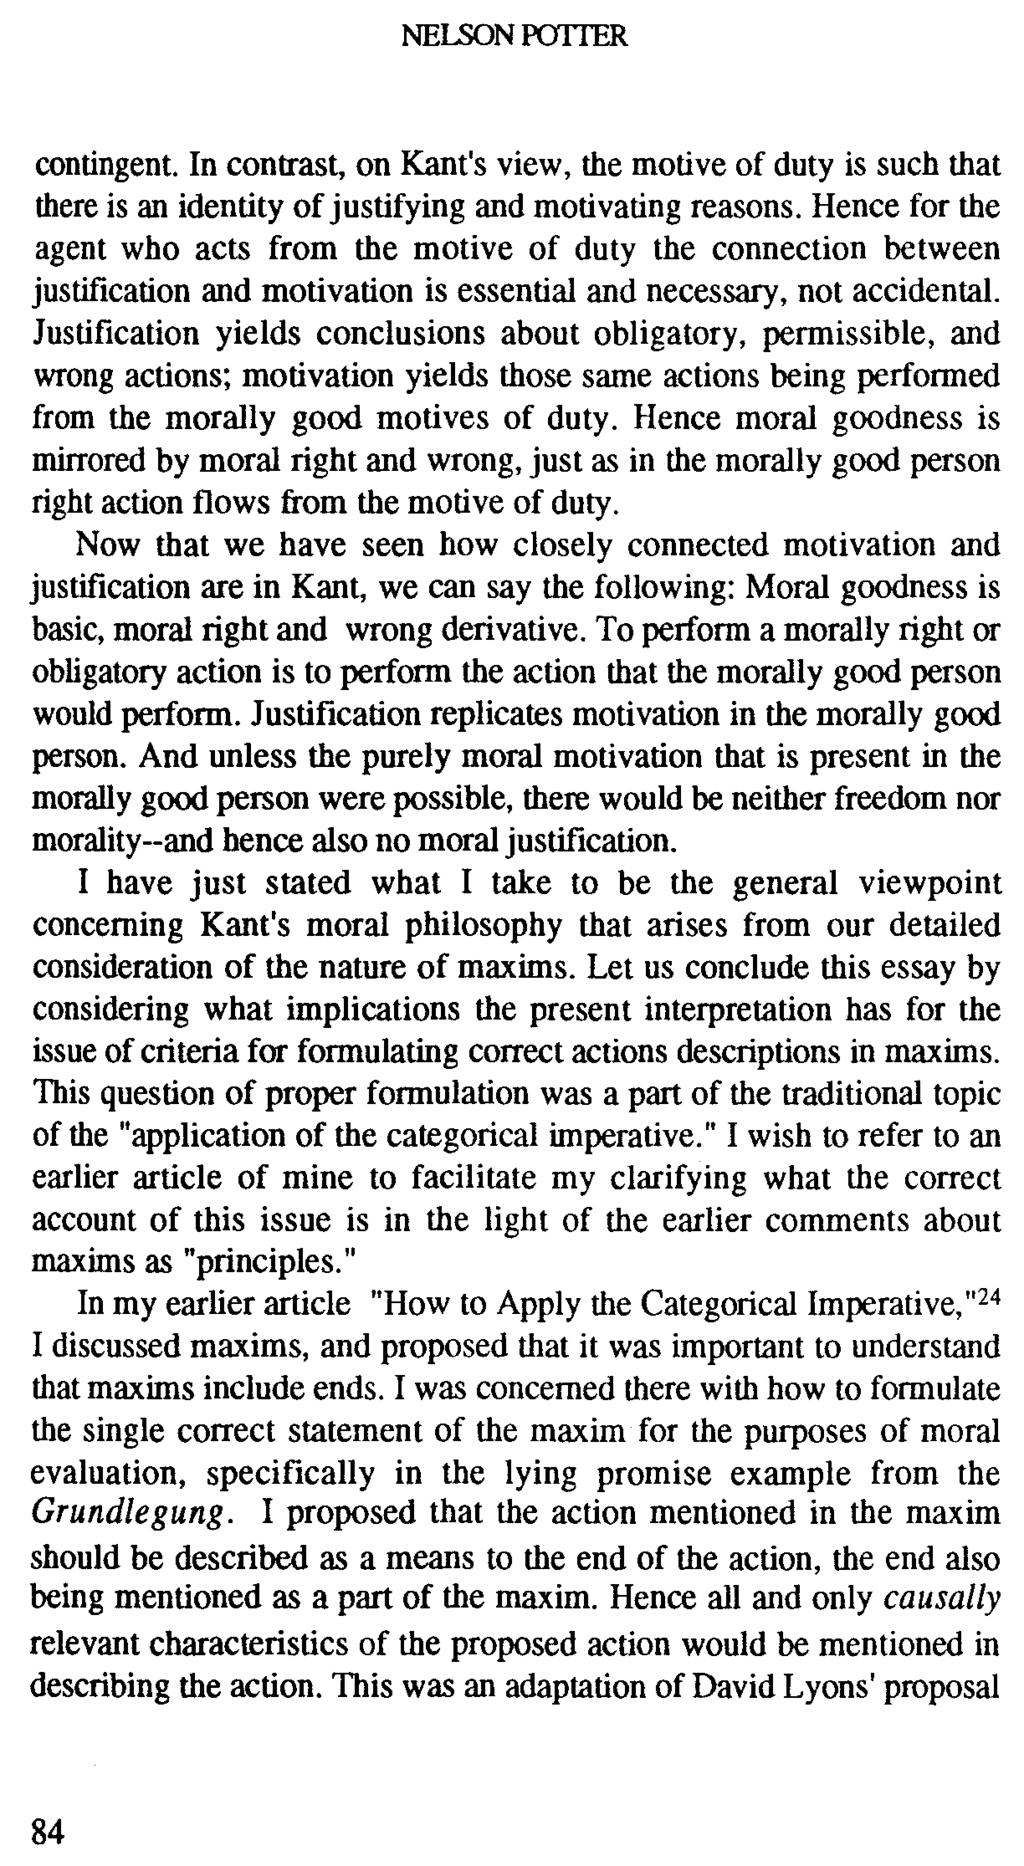 NELSON POTIER contingent. In contrast, on Kant's view, the motive of duty is such that there is an identity ofjustifying and motivating reasons.